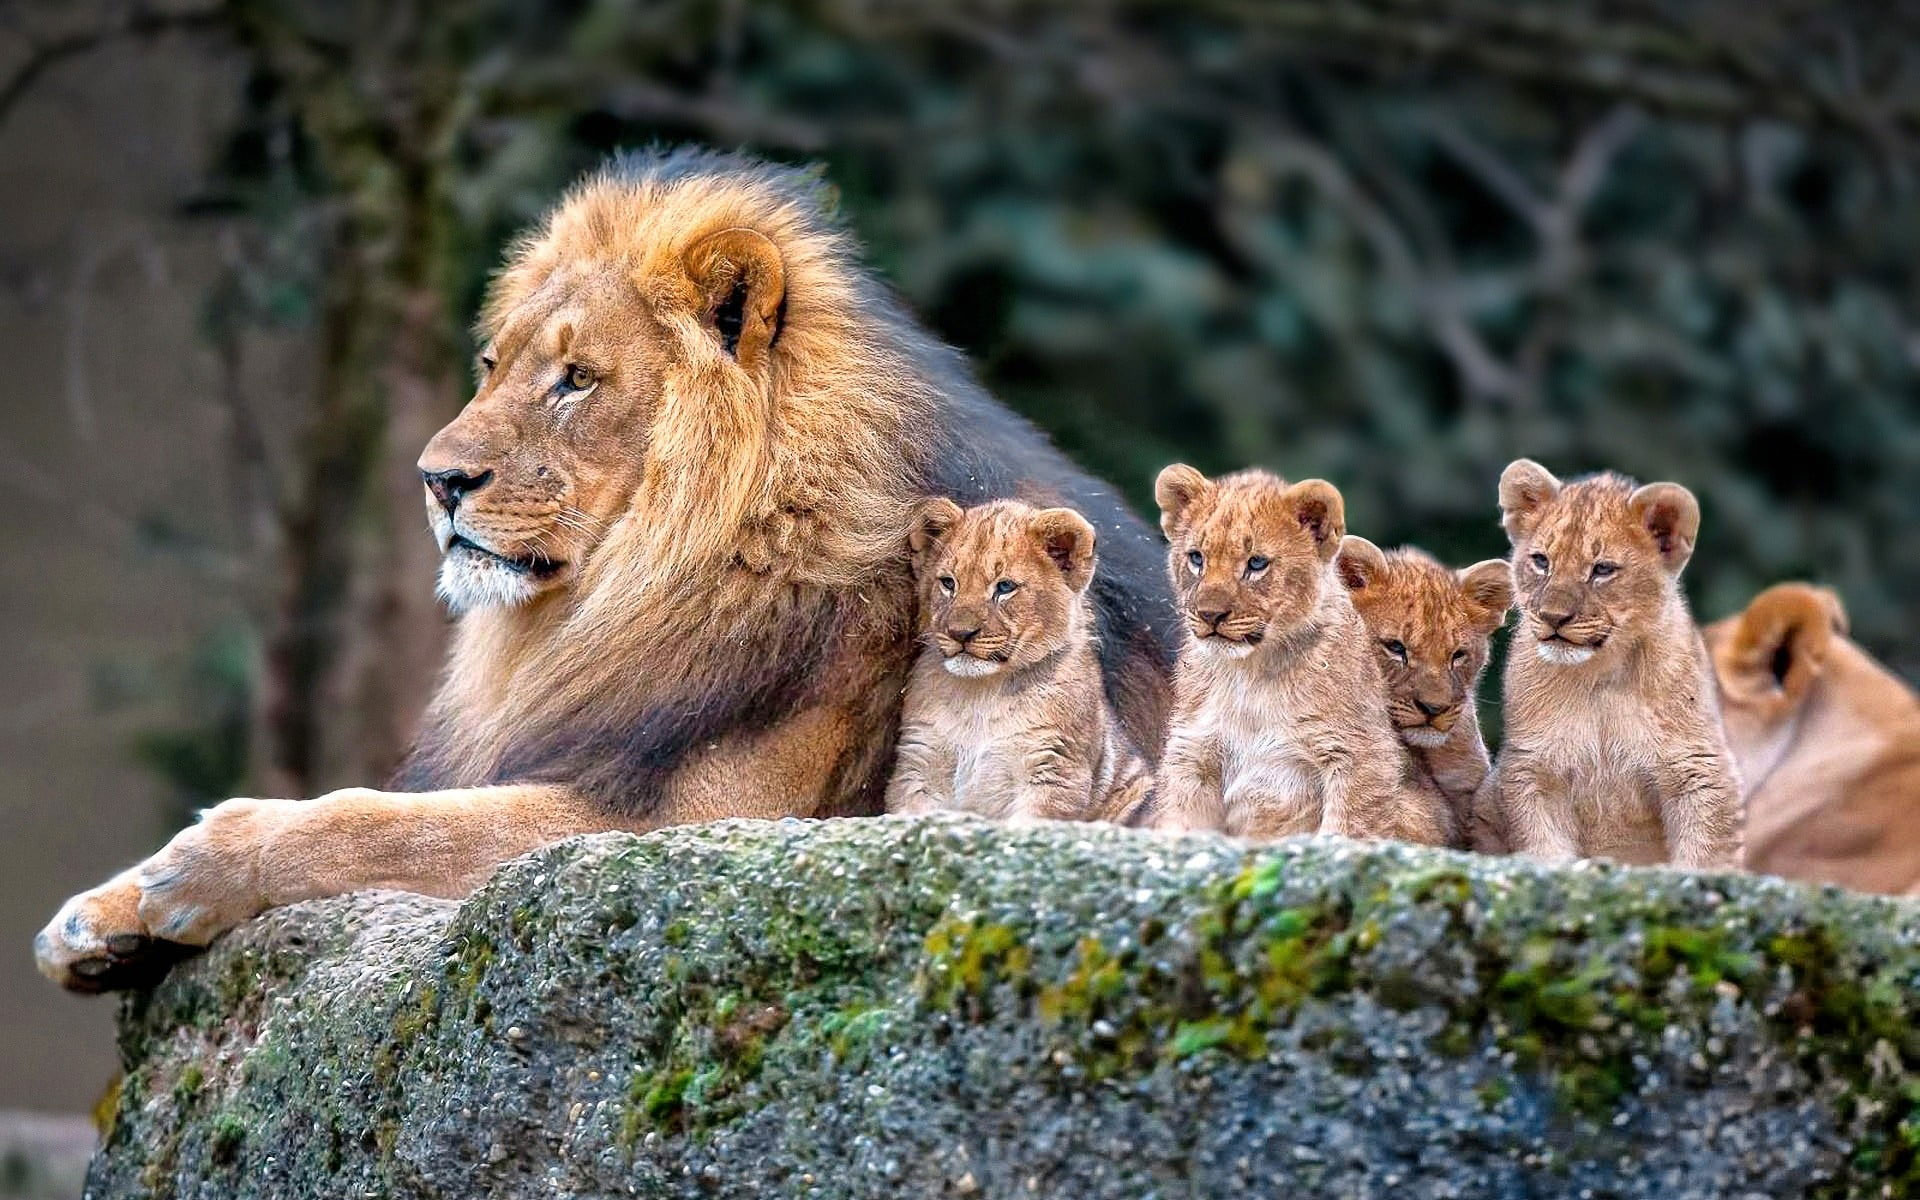 Wallpaper Lion And Baby Lions, Nature, Animals, Baby Animal • Wallpaper For You